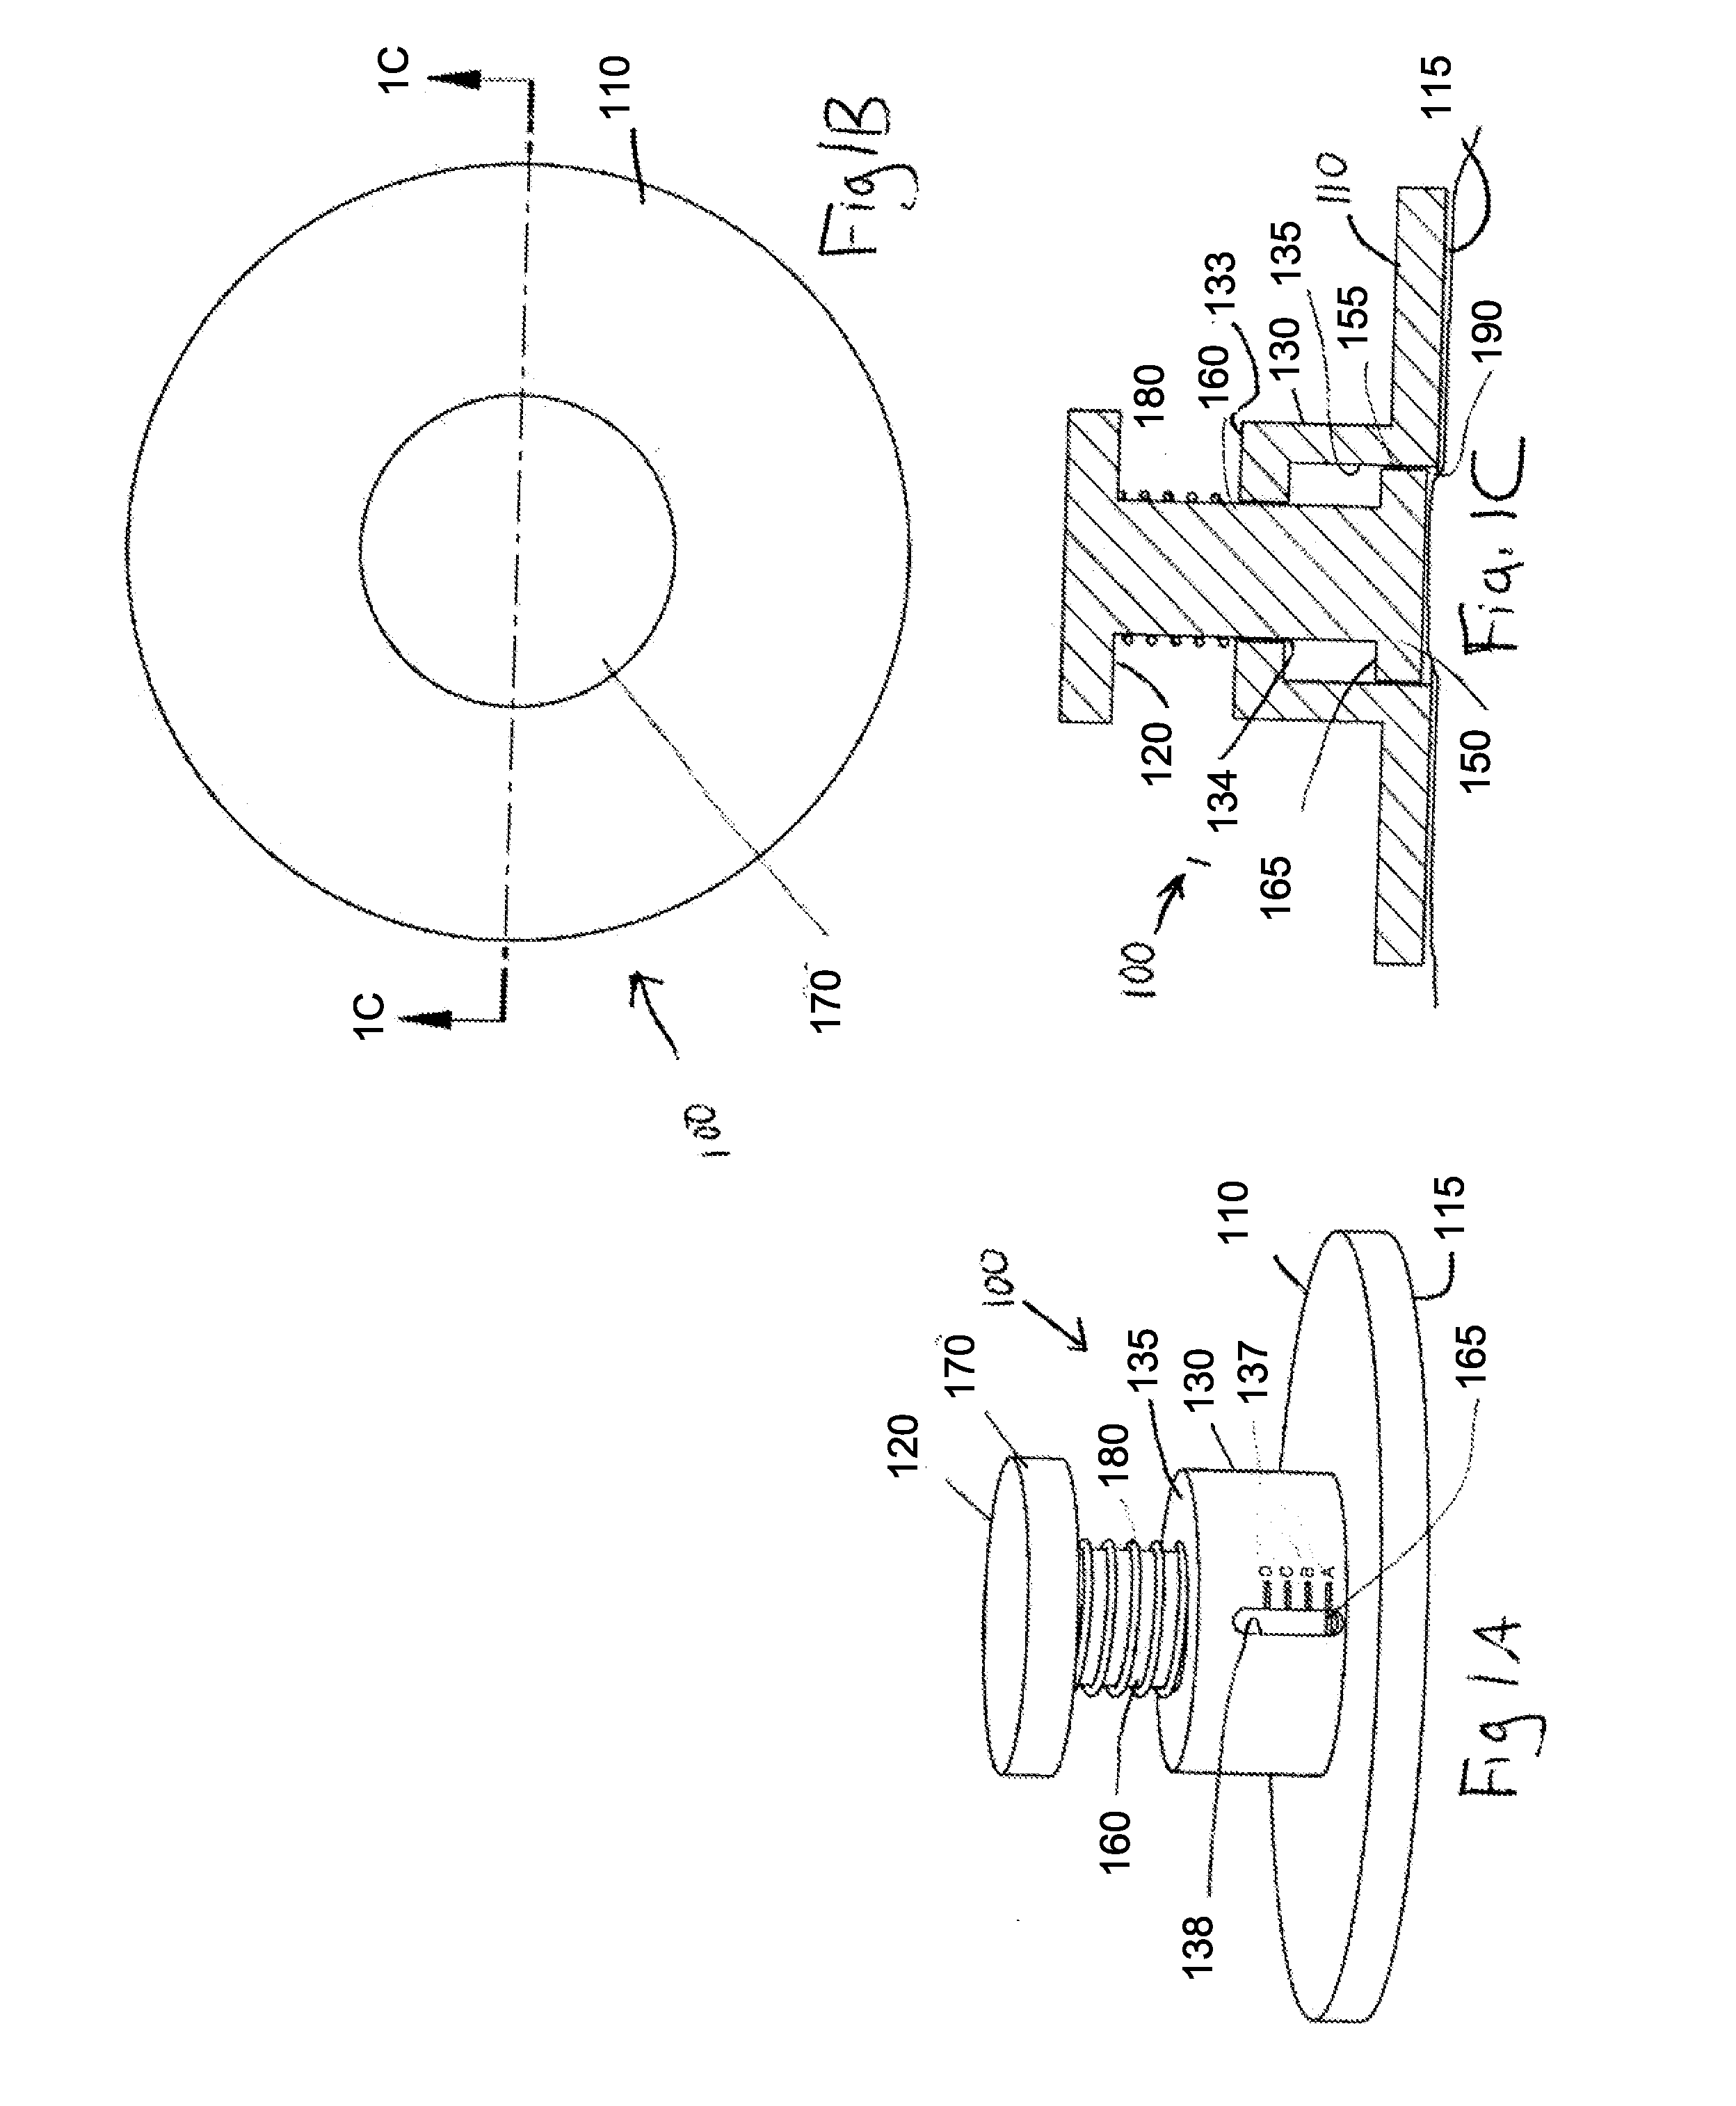 Elastic devices, methods, systems and kits for selecting skin treatment devices